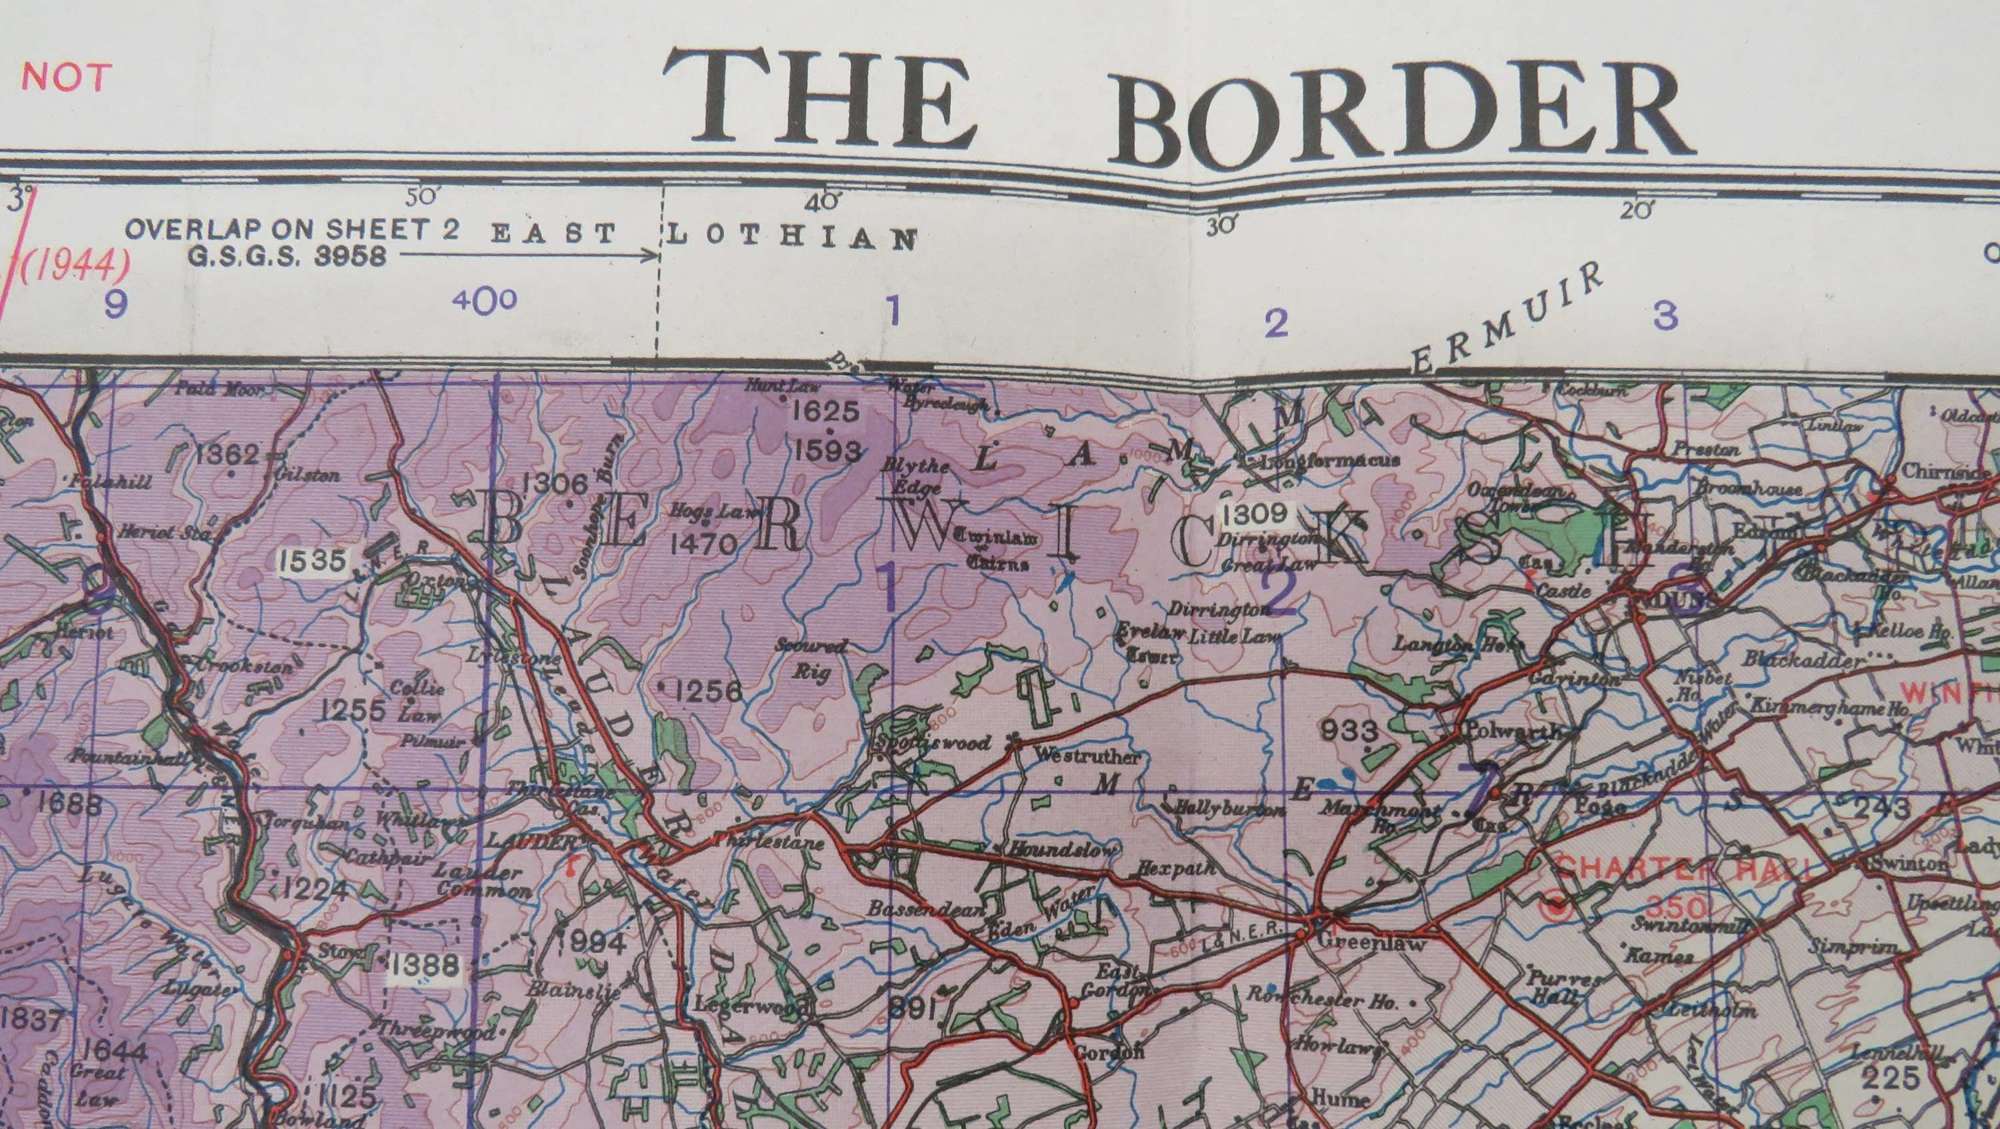 WW2 British Military Map of The Borders